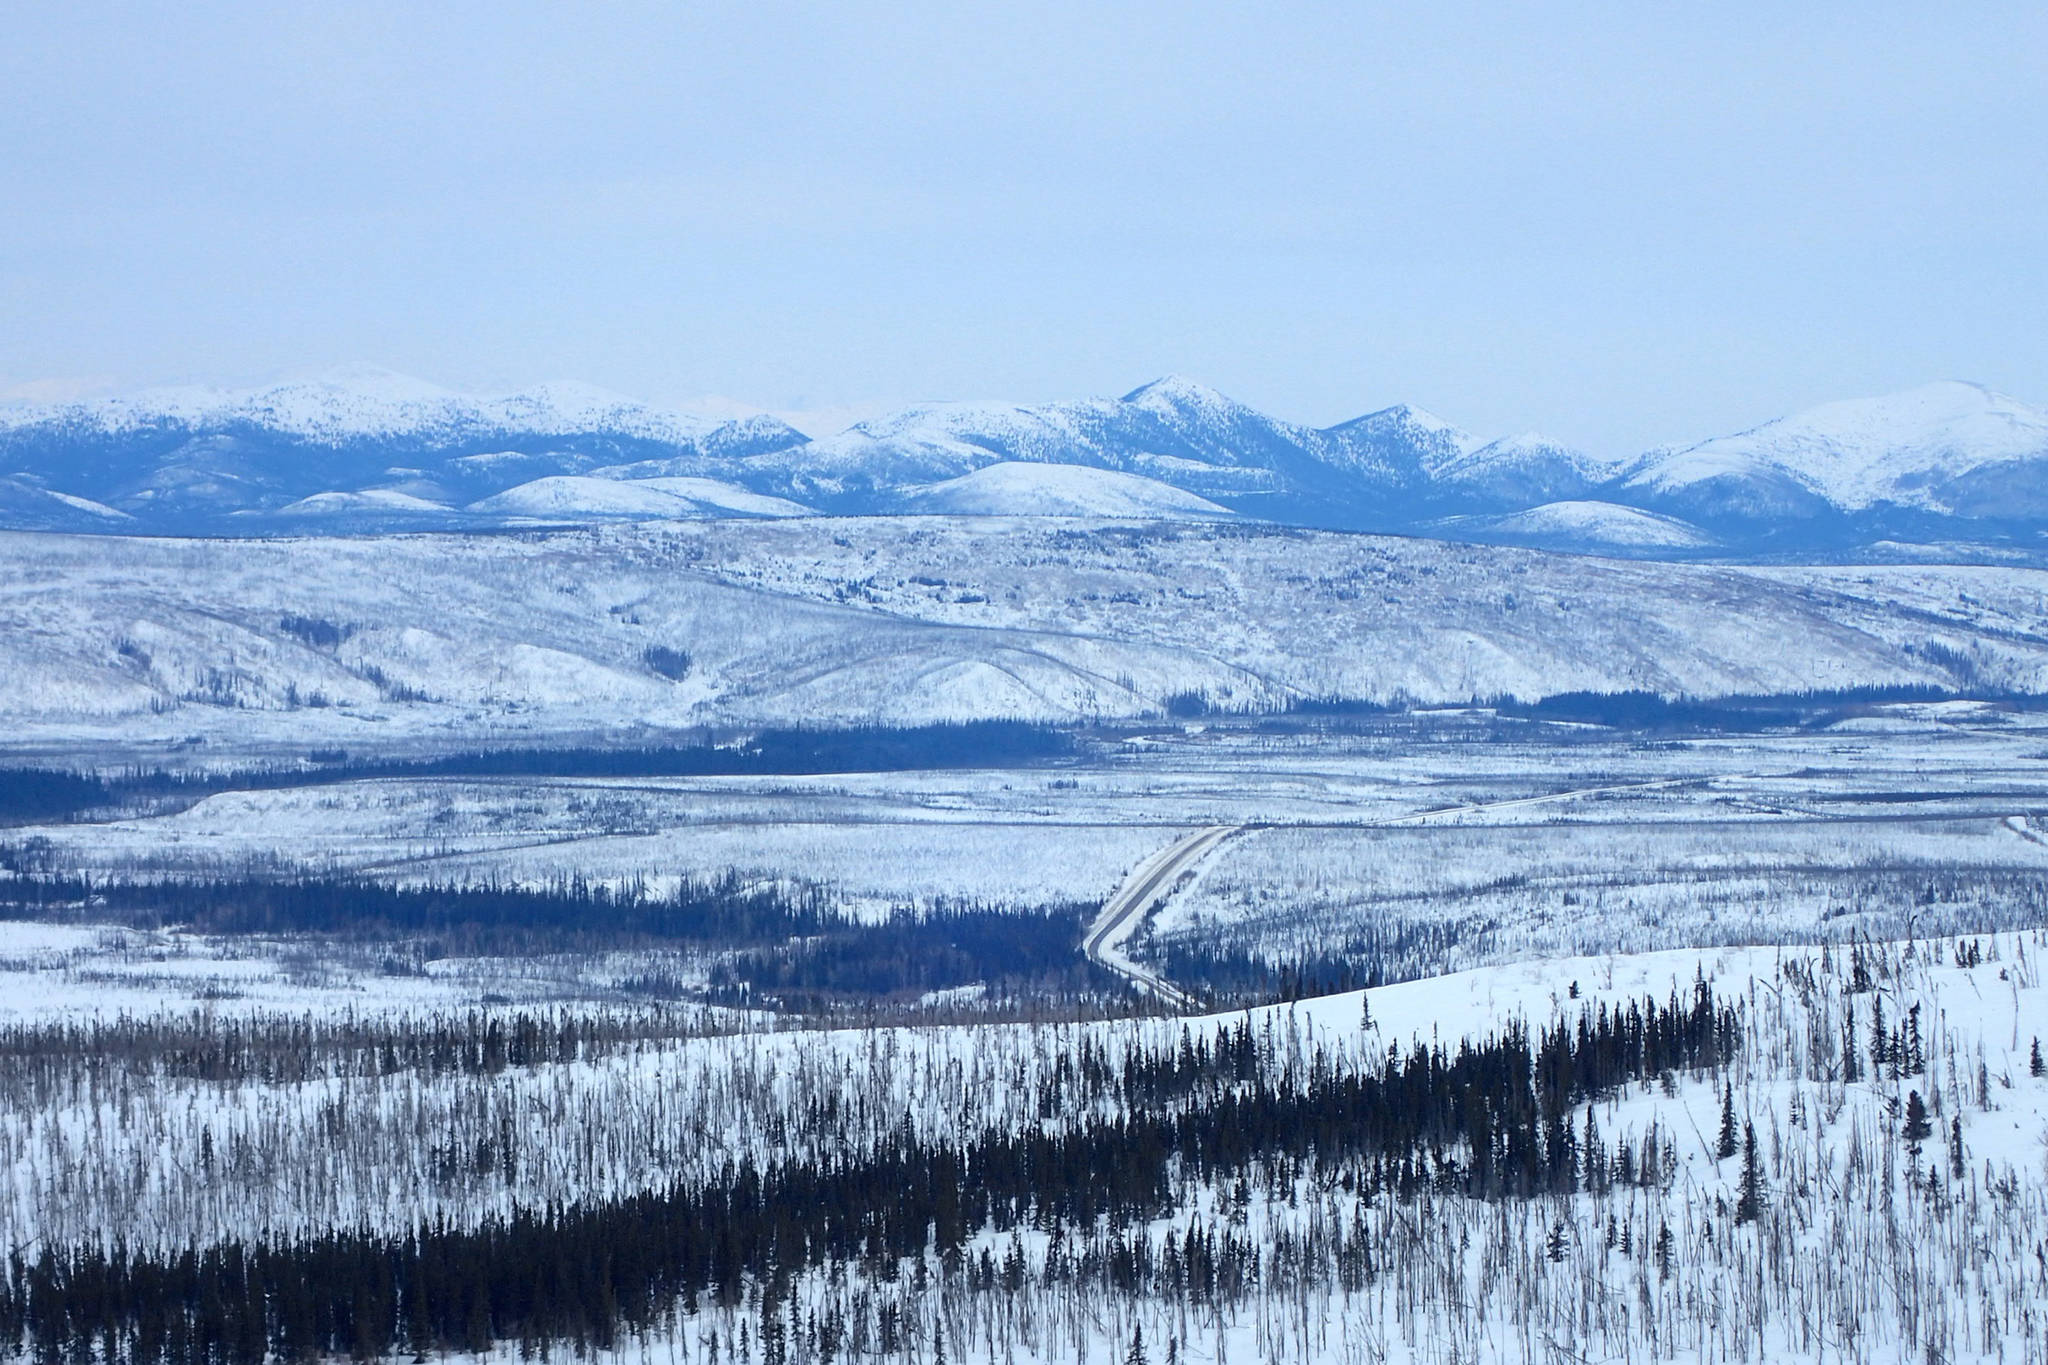 The valleys of Jim River and Prospect Creek in northern Alaska, where an official thermometer registered Alaska’s all-time low of minus 80 degrees F on Jan. 23, 1971. Photo by Ned Rozell